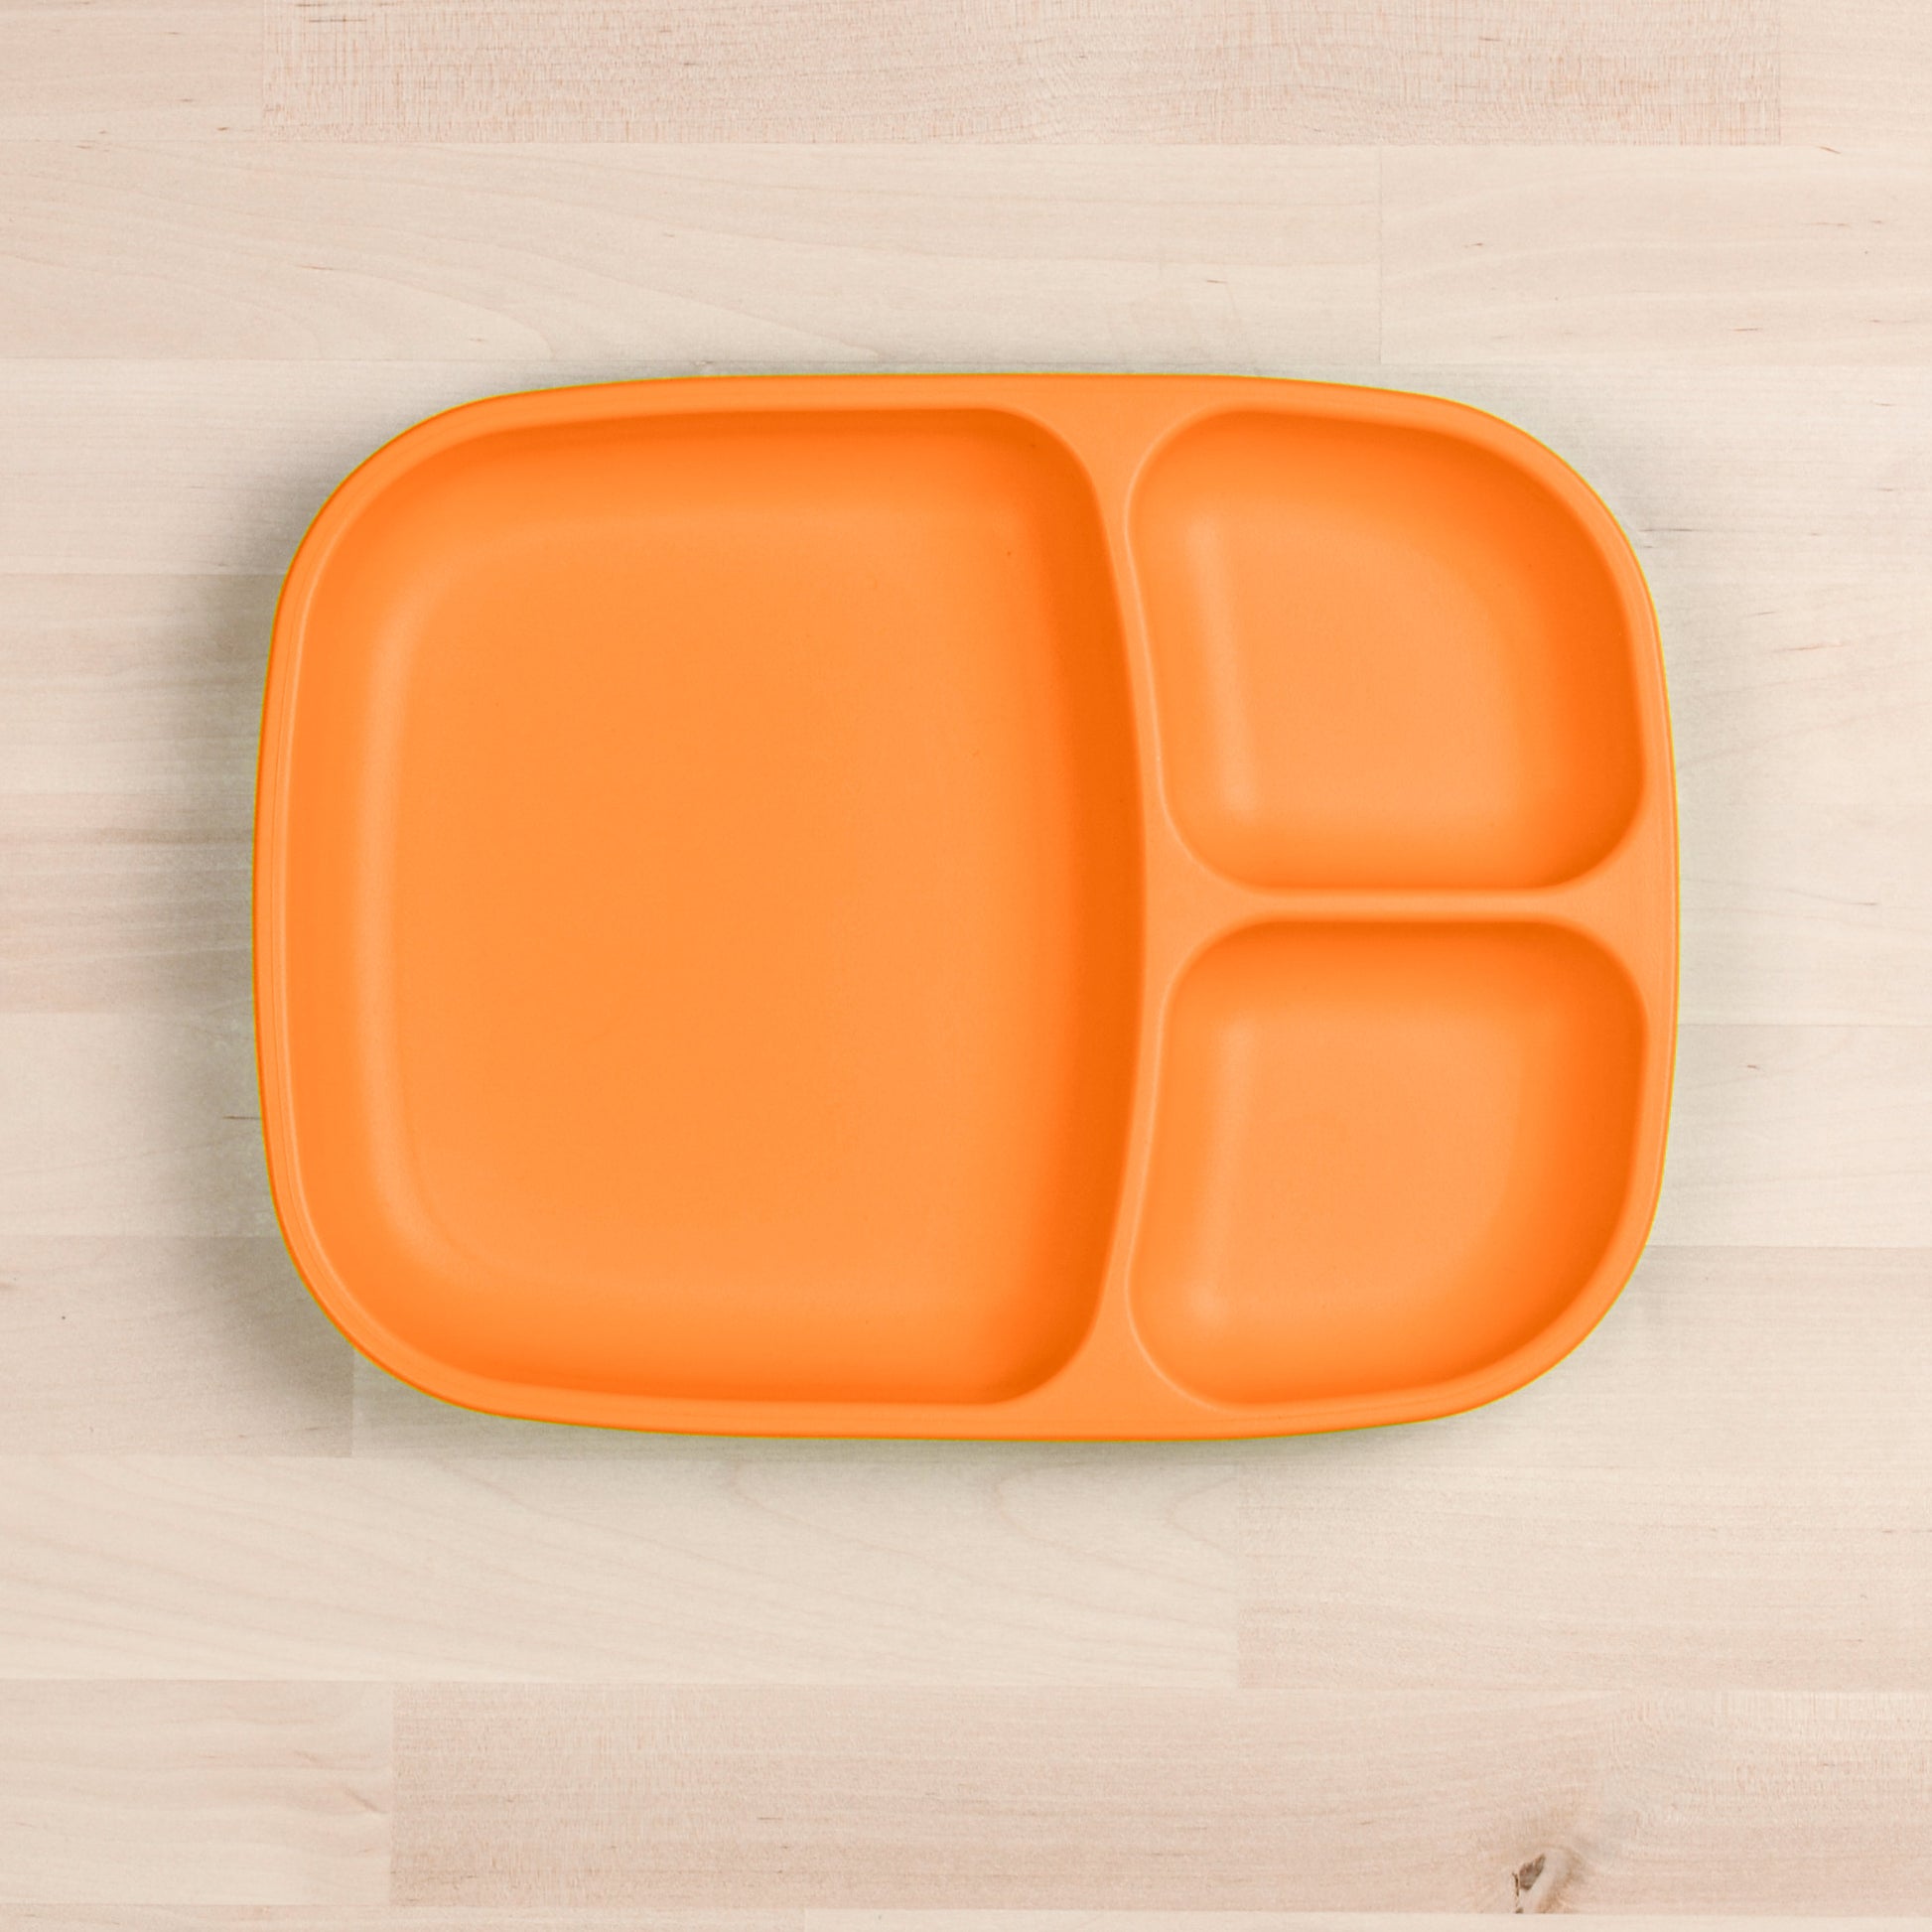 Re-Play Divided Tray in Orange from Bear & Moo